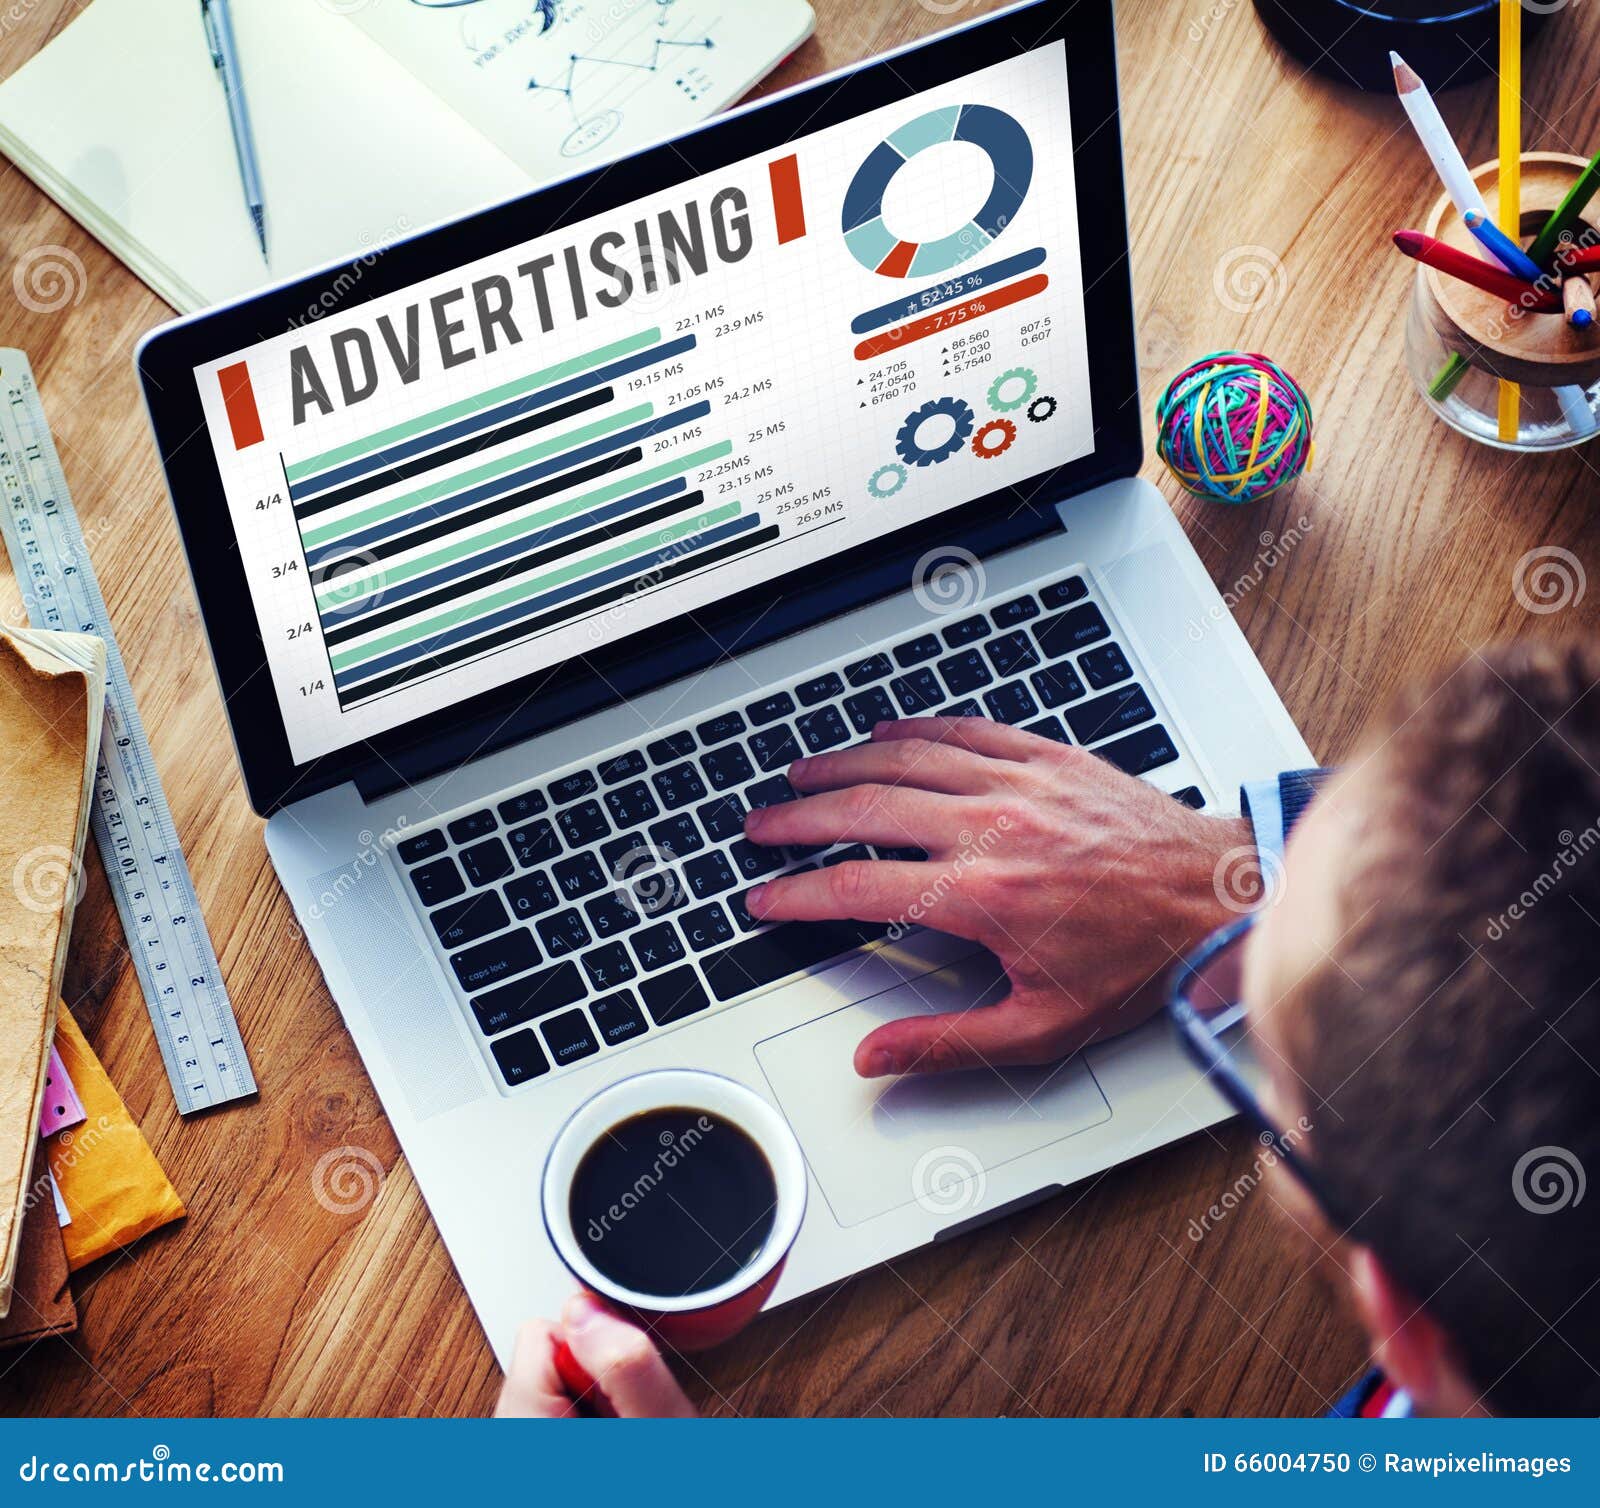 advertising digital marketing commercial promotion concept